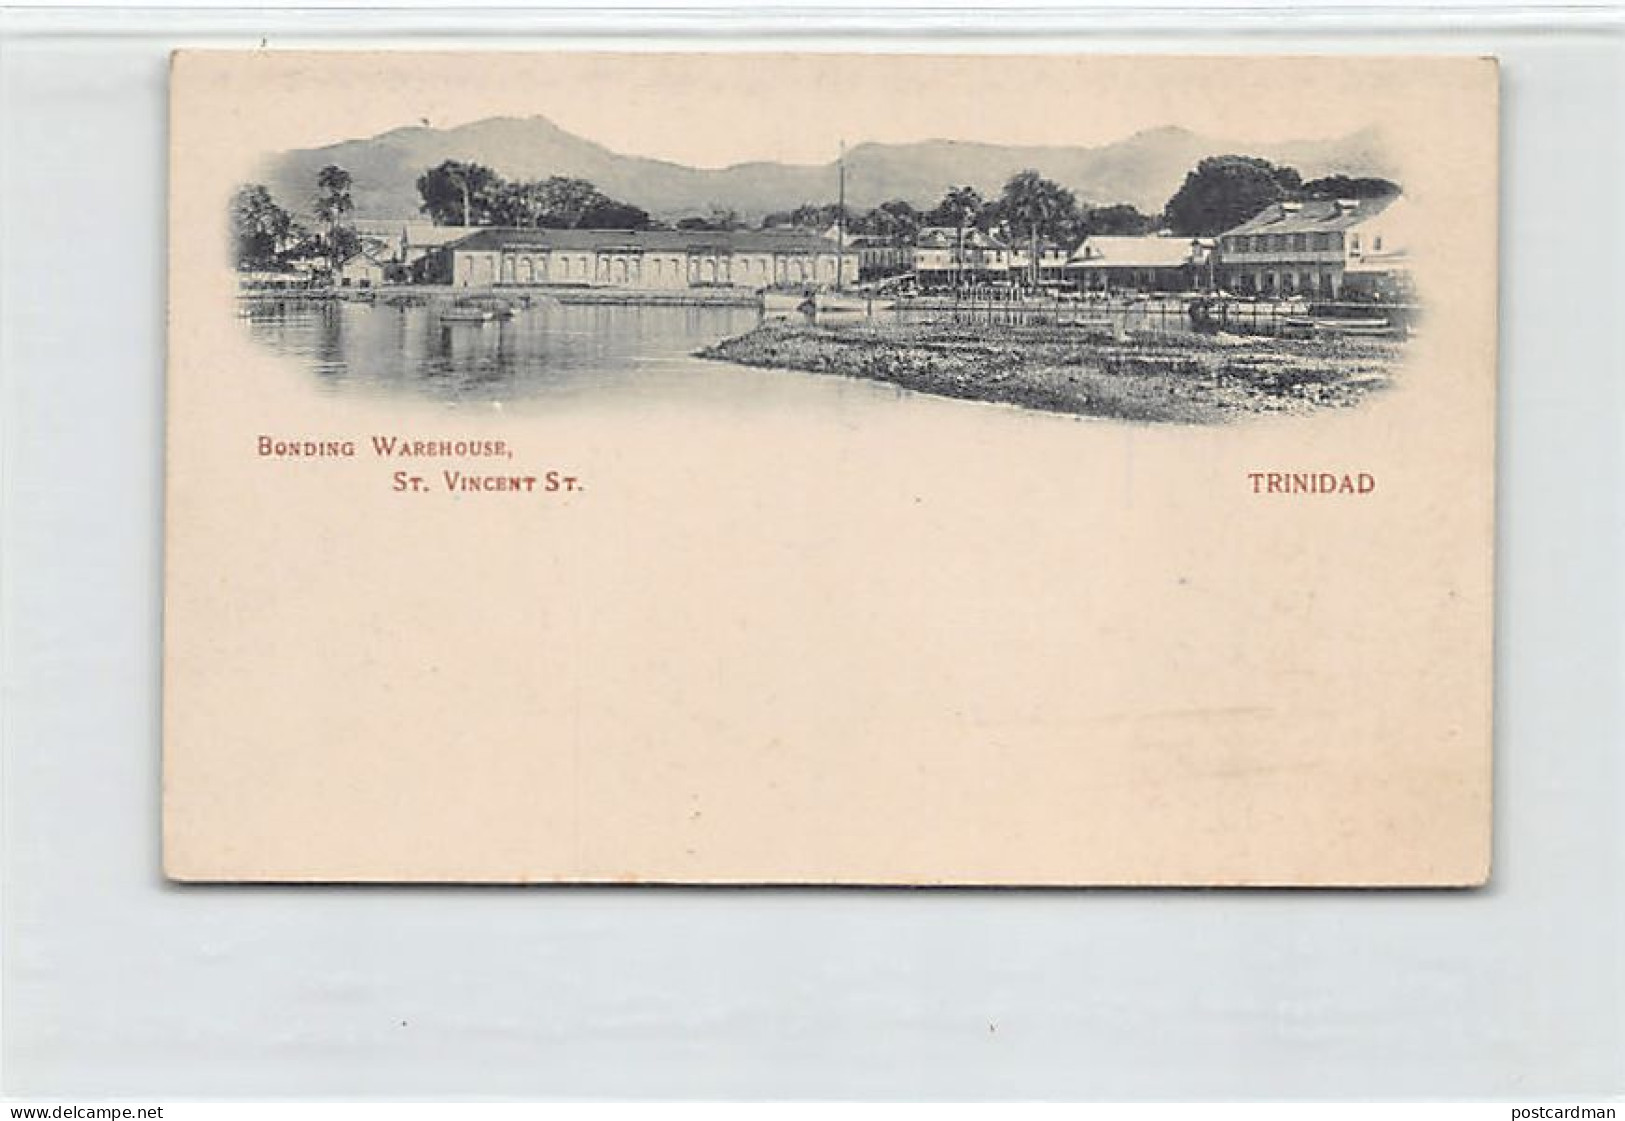 Trinidad - PORT OF SPAIN - Bonding Warehouse, St. Vincent Street - SMALL SIZE Early Forerunner Postcard - Publ. Unknown  - Trinidad